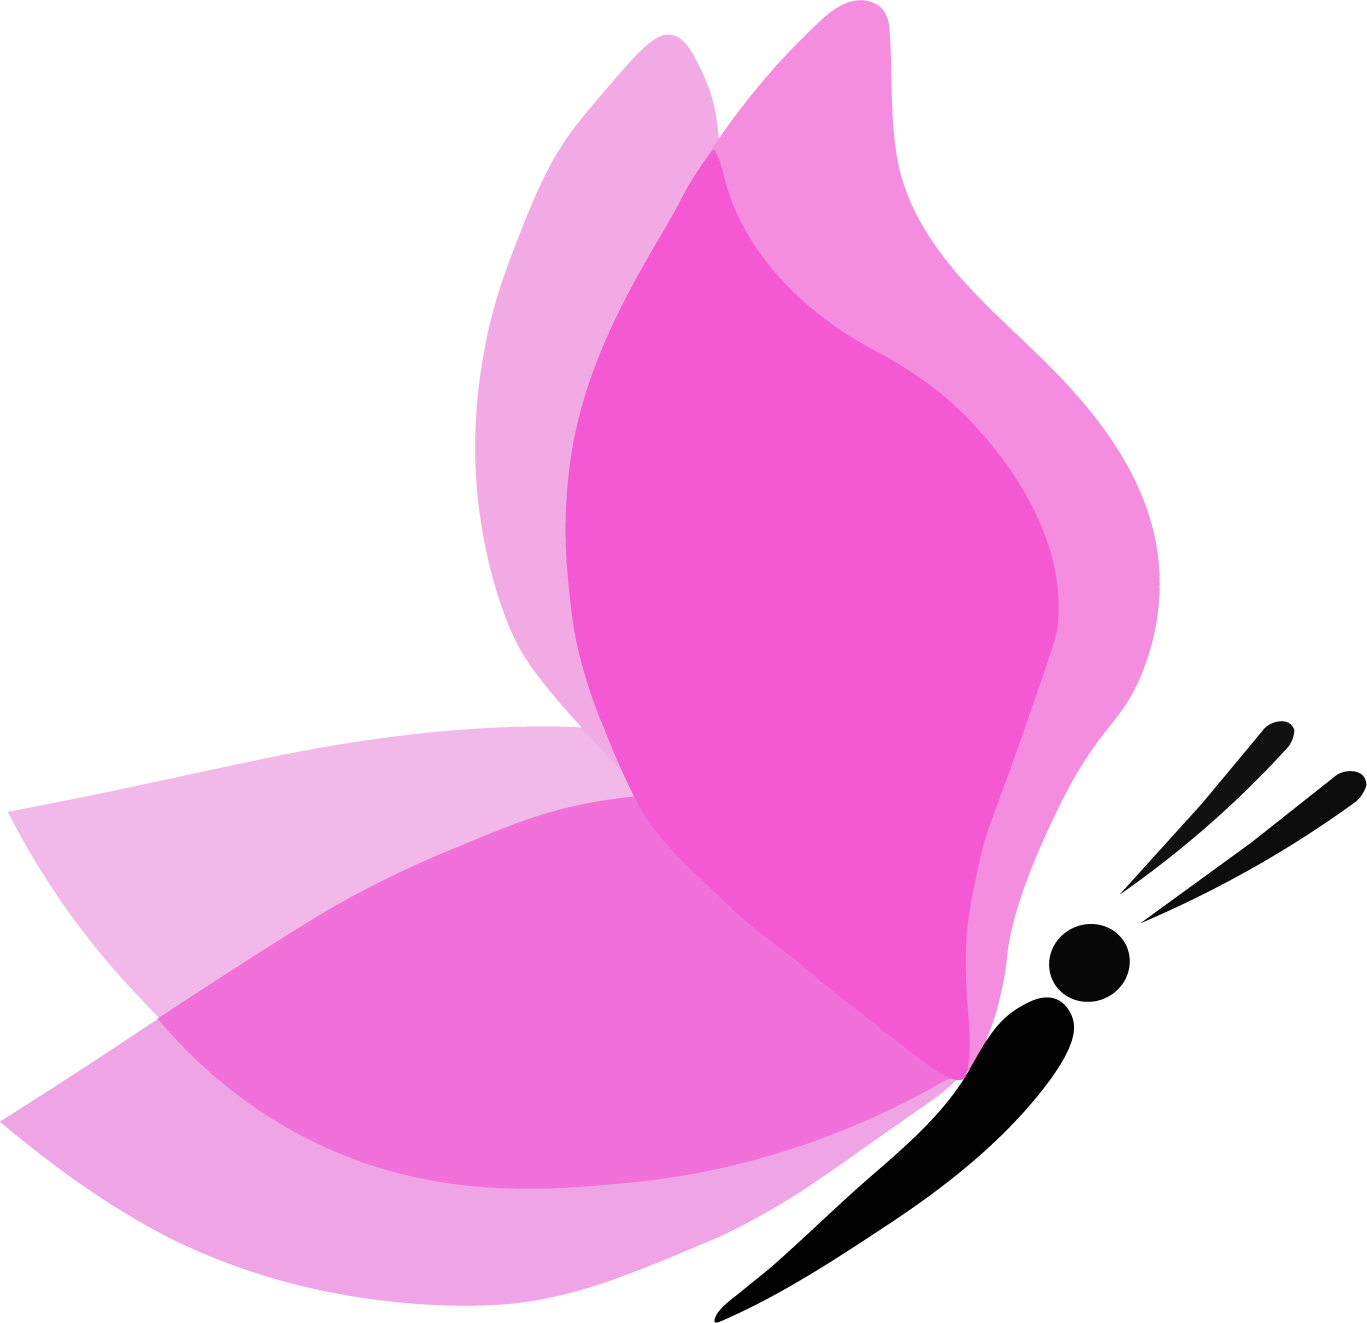 Langtrees_pink_butterfly_logo.png